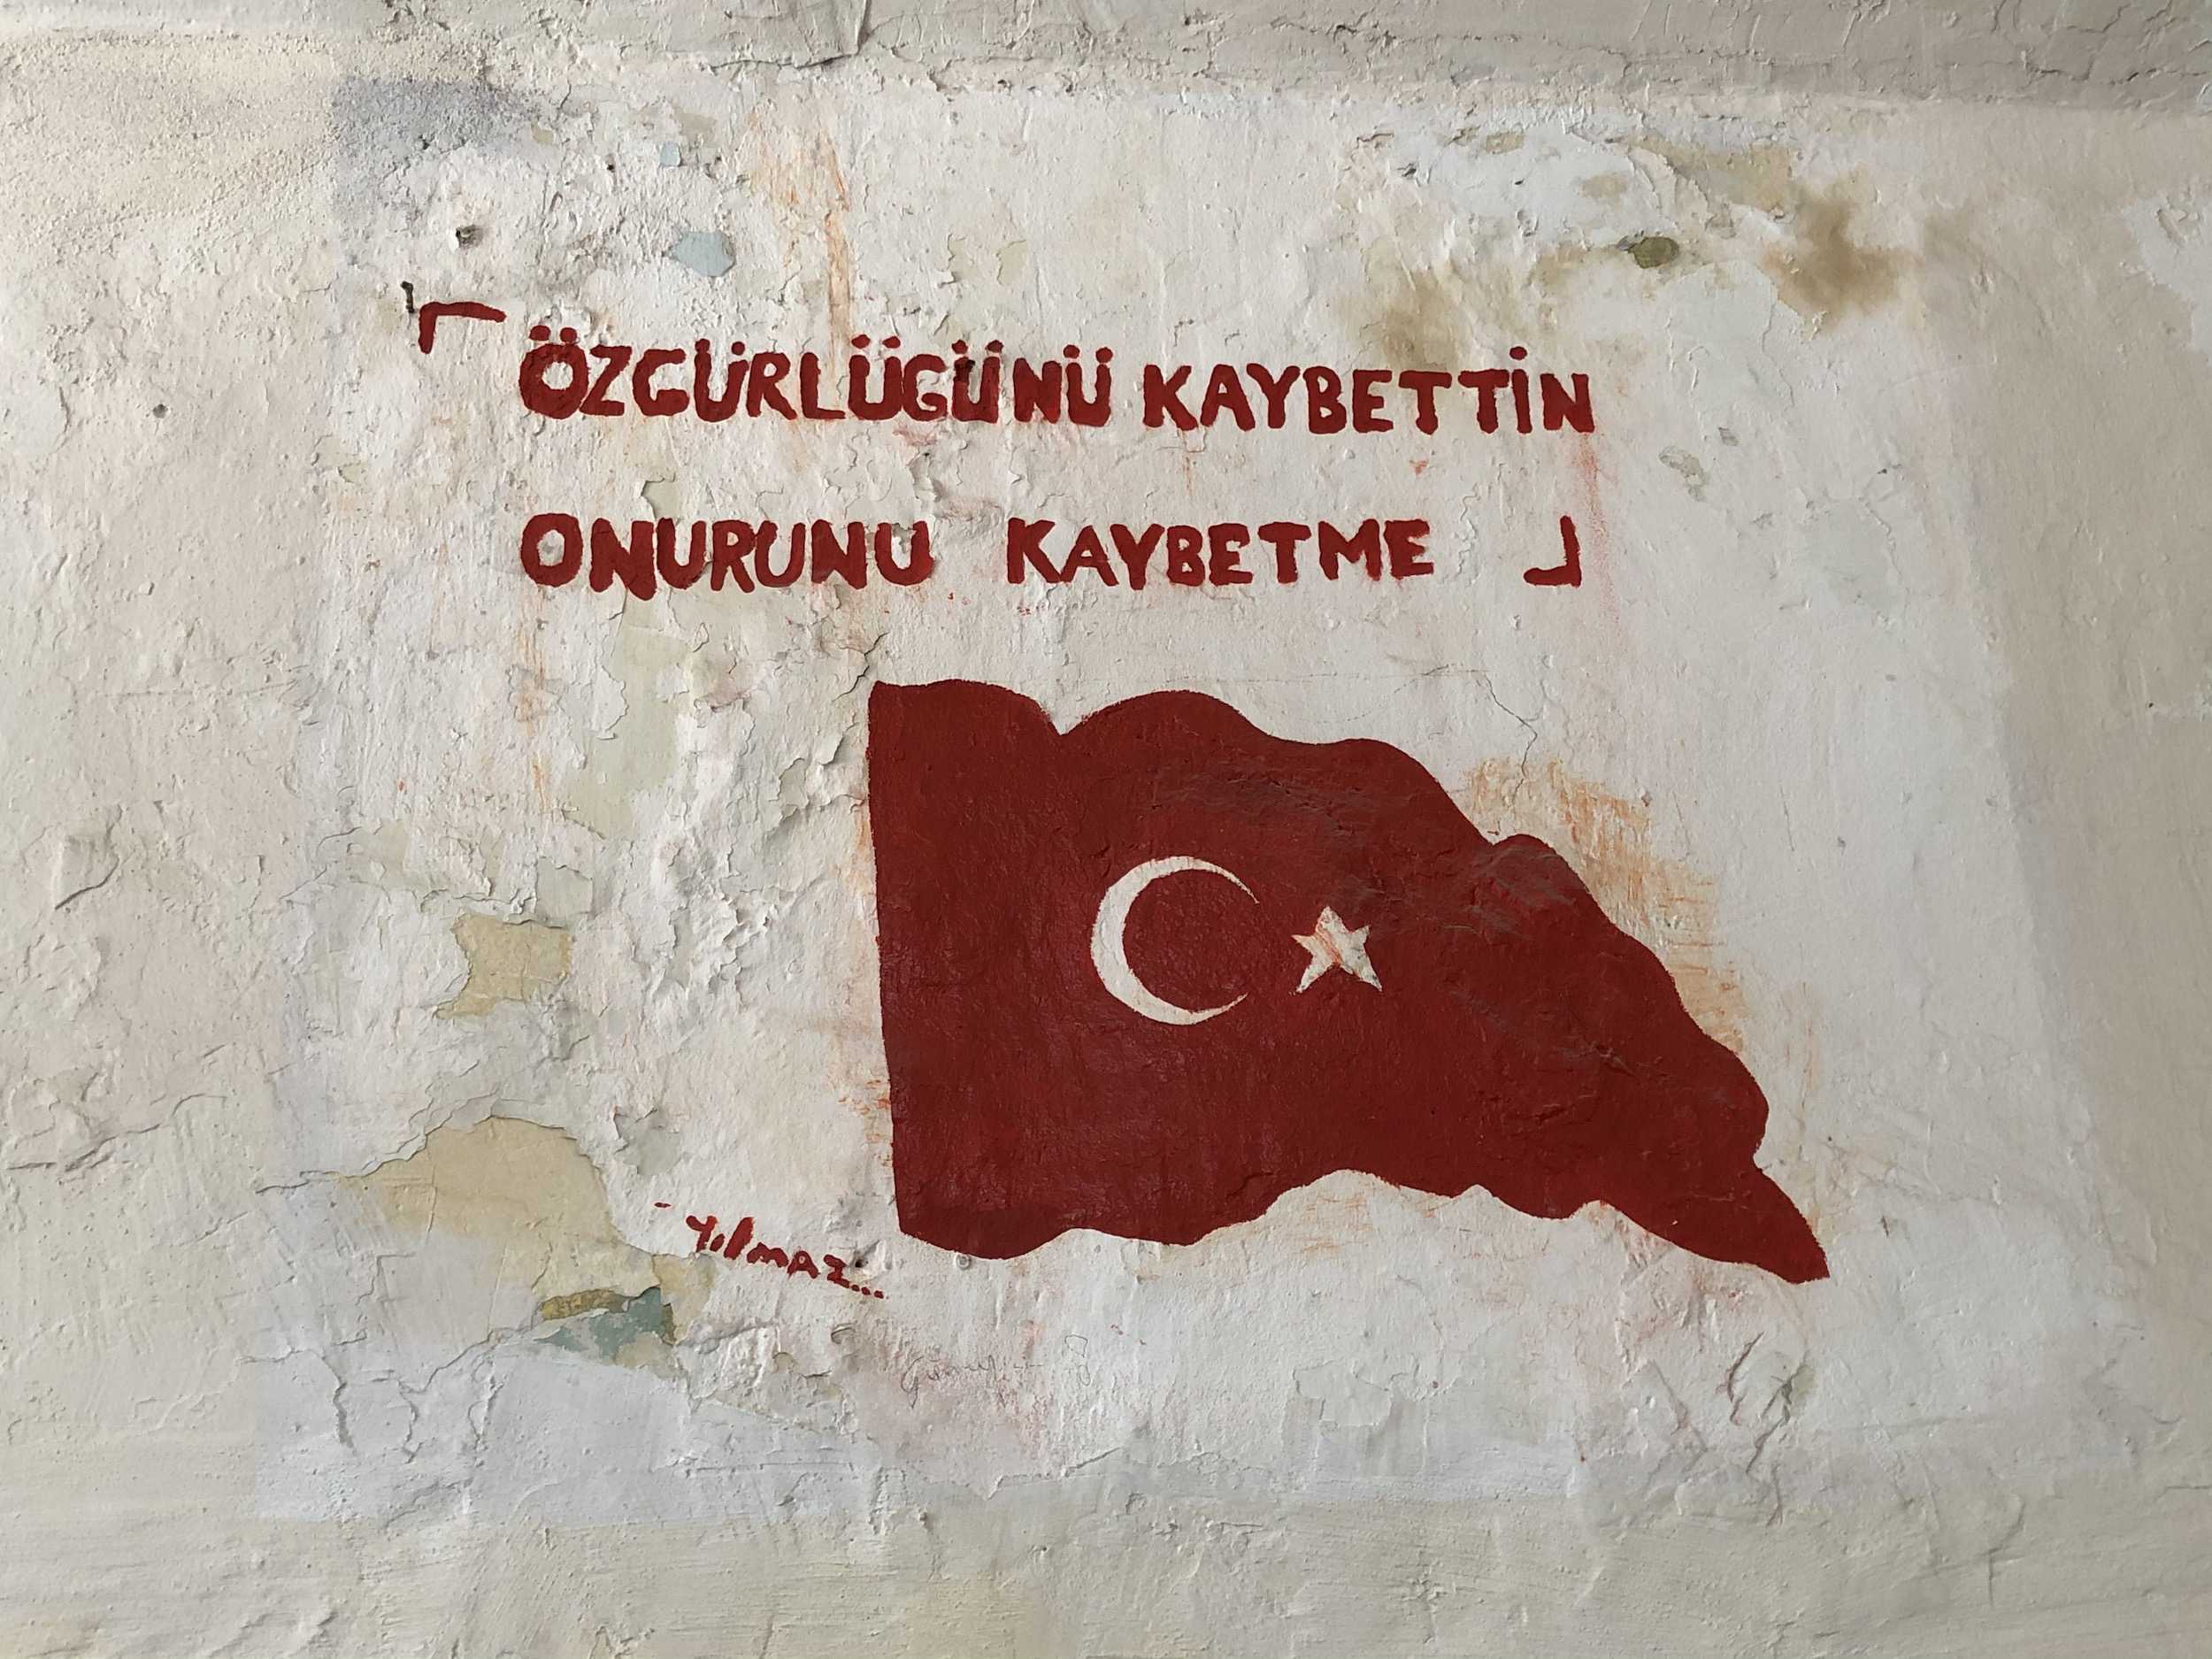 "You lost your freedom, don't lose your honor" in the 5th Ward at Ulucanlar Prison in Ankara, Turkey